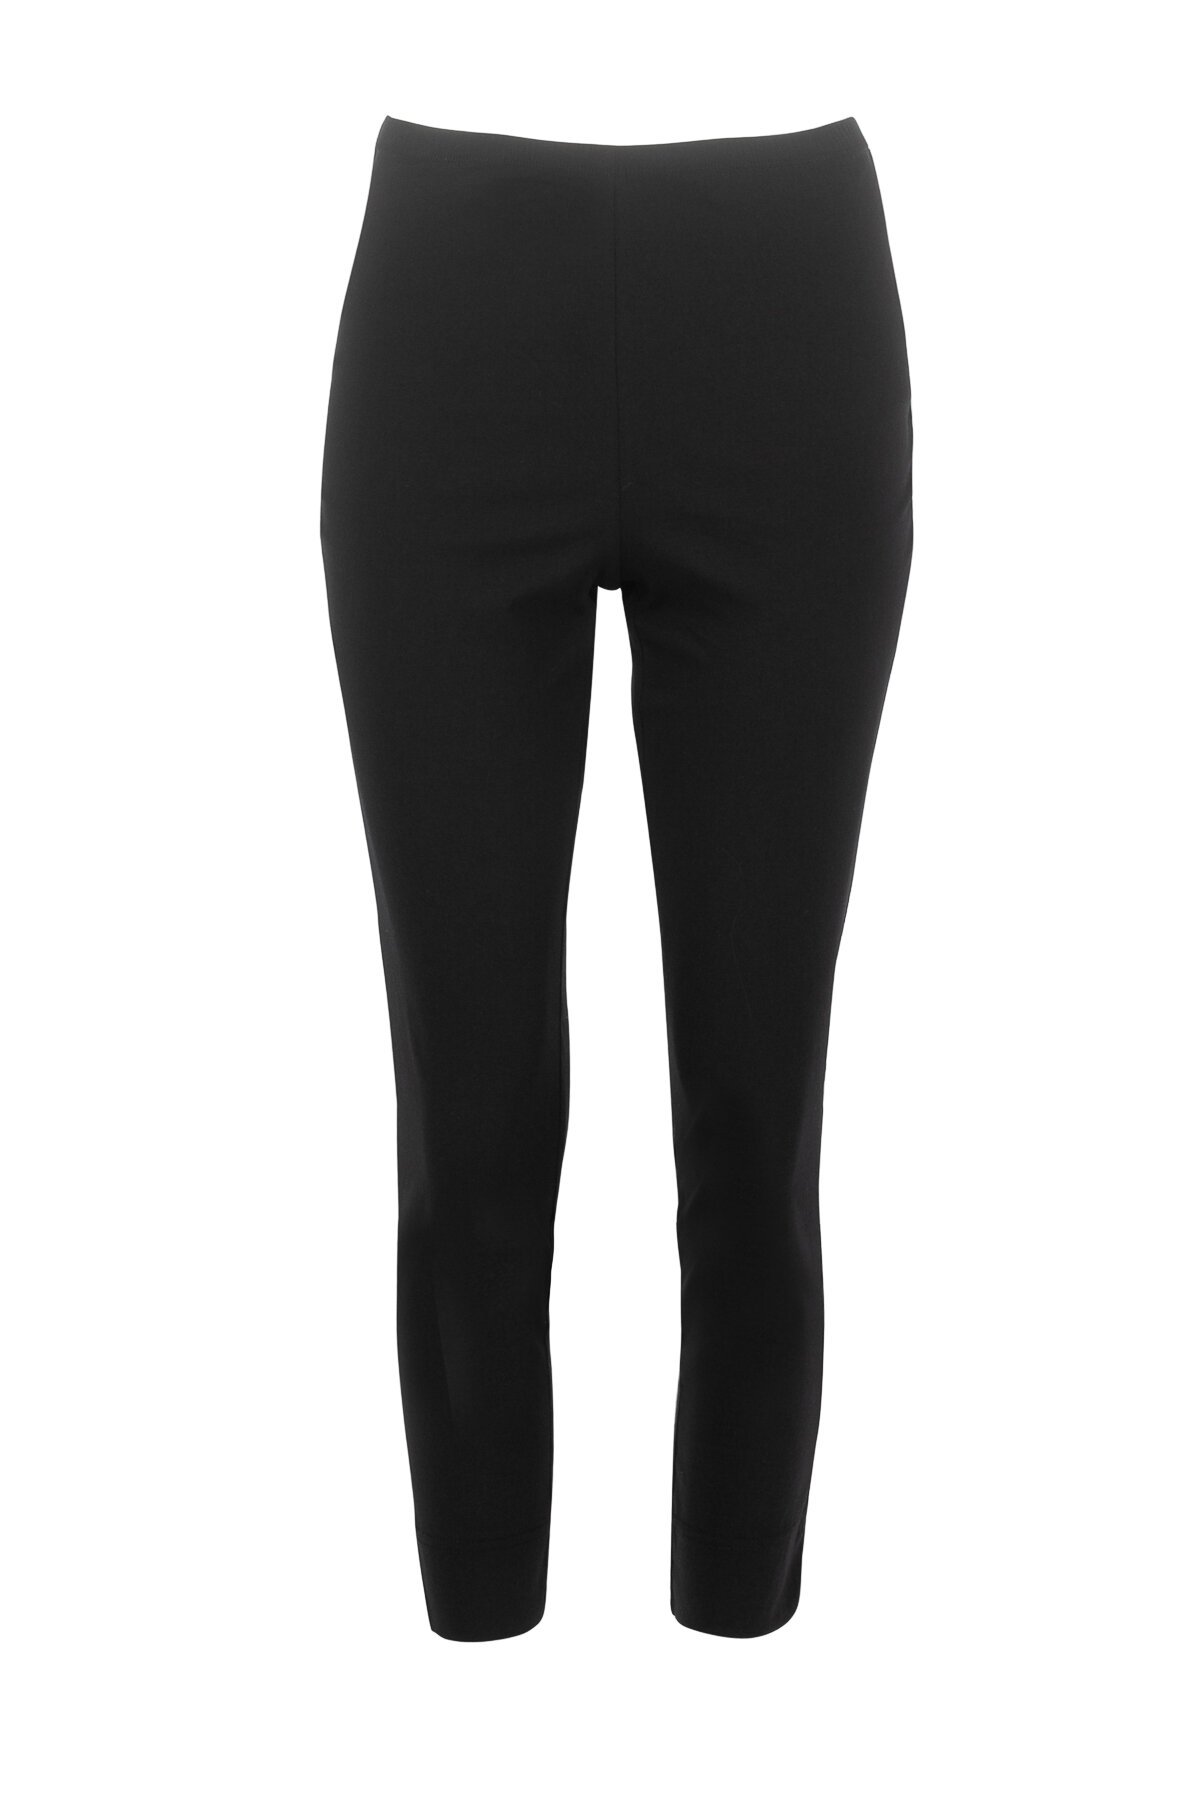 Verge Acrobat Eclipse Pant Pants Mainly Casual Womens Clothing Stocking Your Favourite 